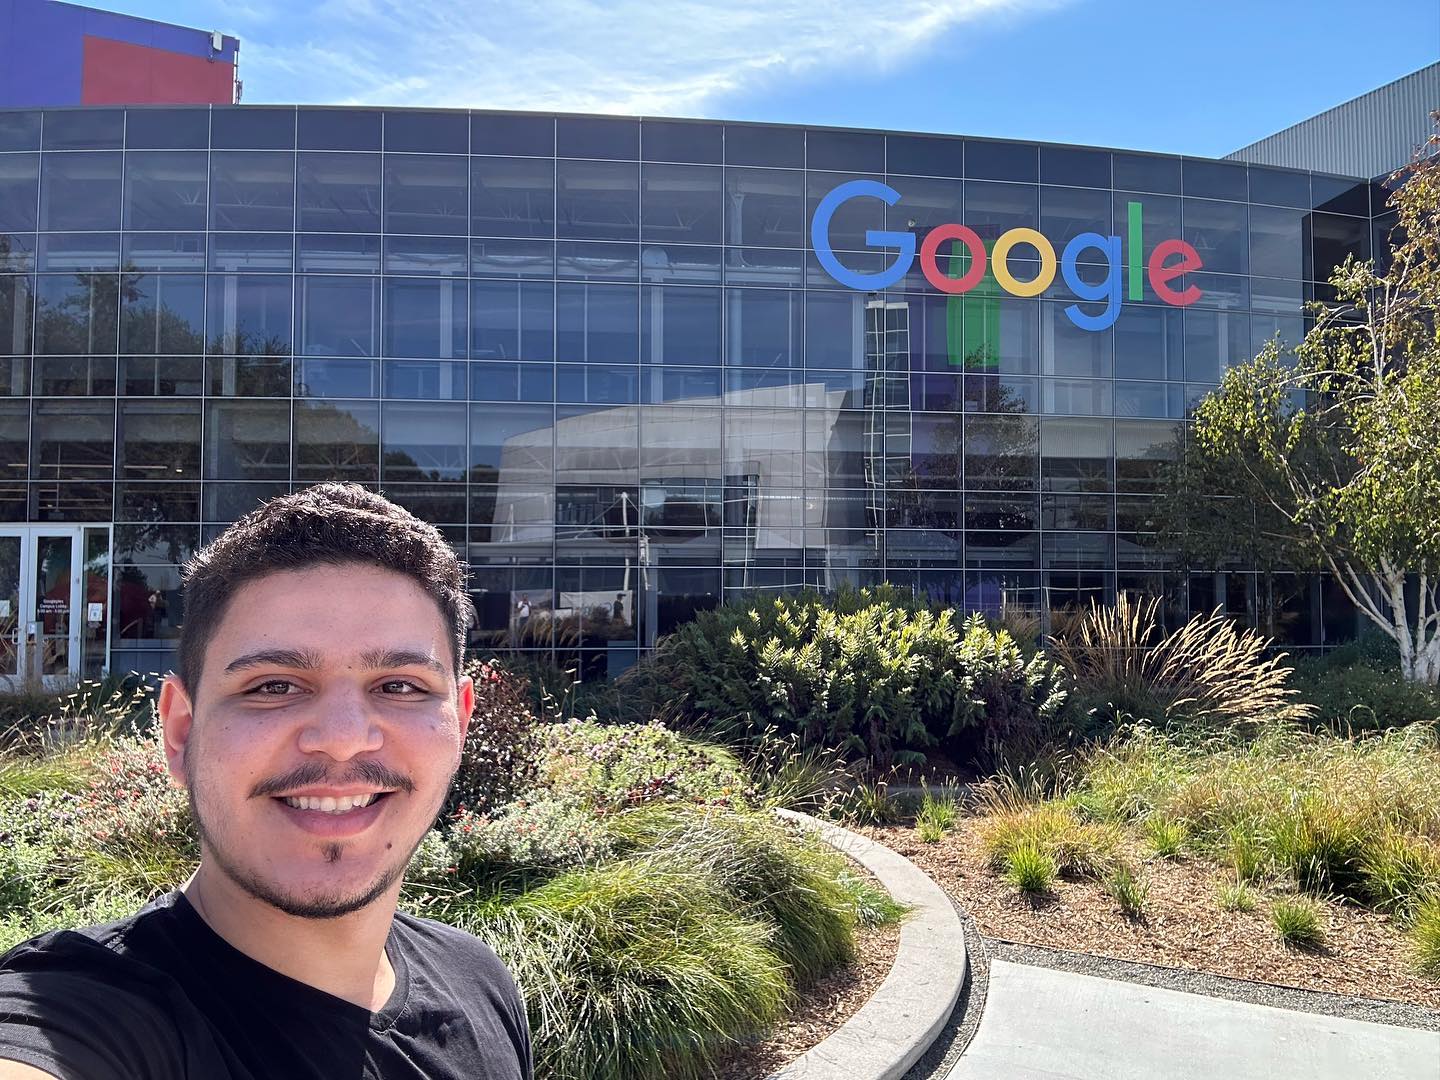 The happiness of the person visiting Google's headquarters